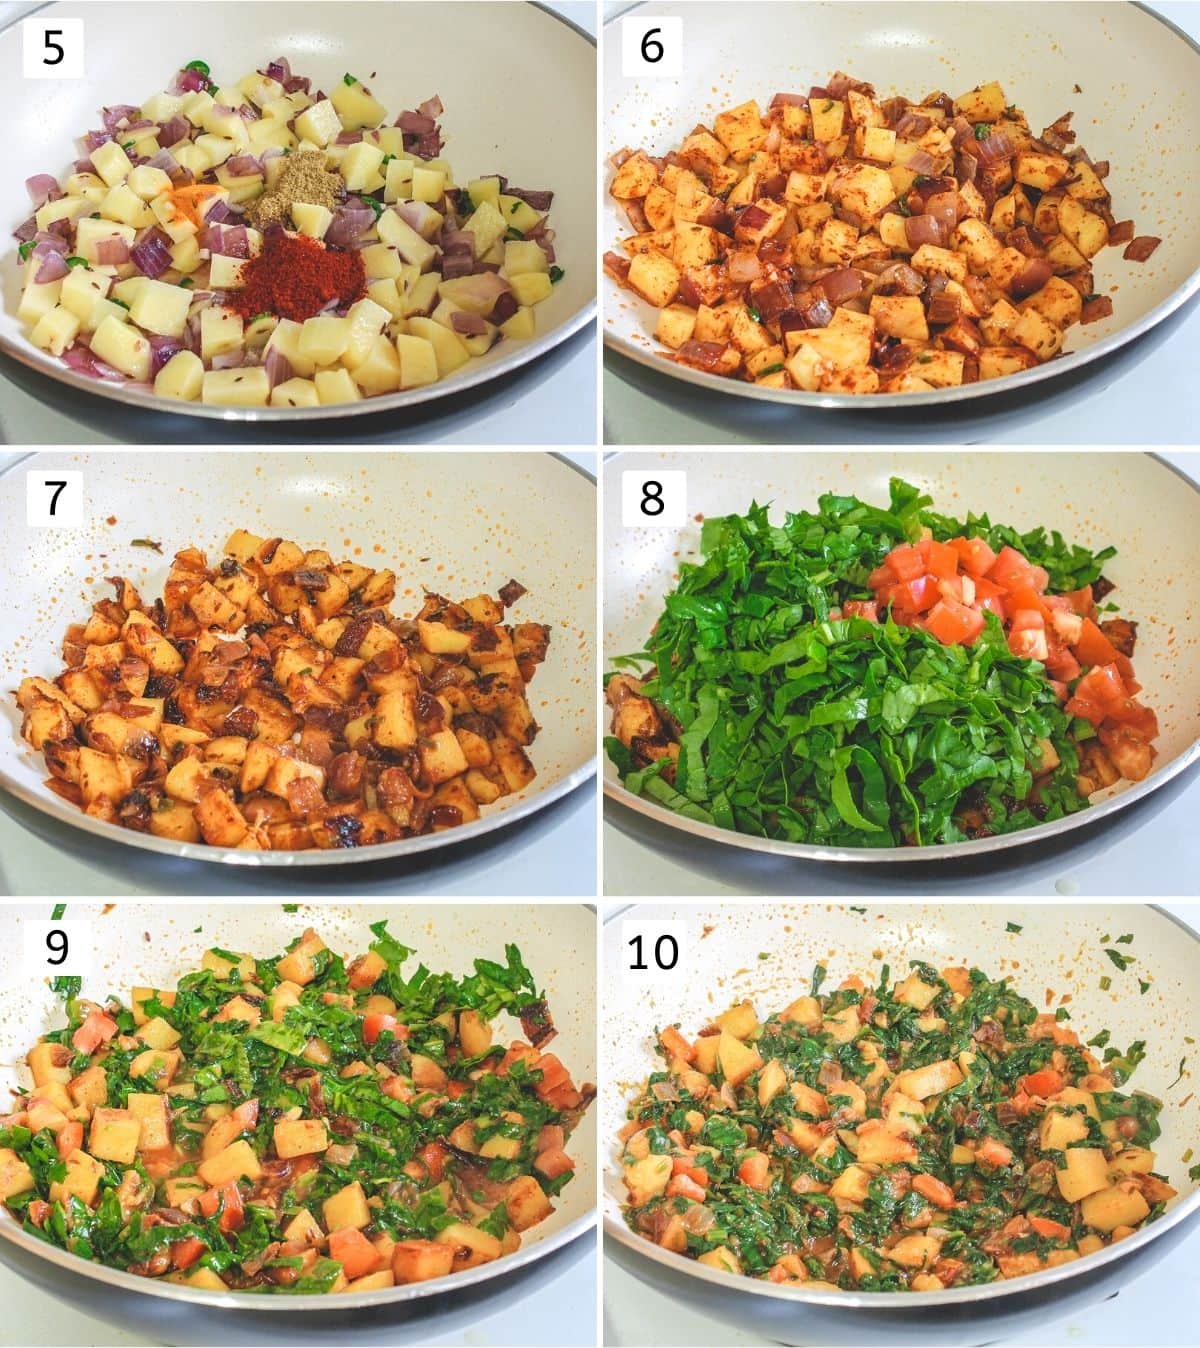 Collage of 6 images showing cooking potatoes with spices, adding and cooking spinach.